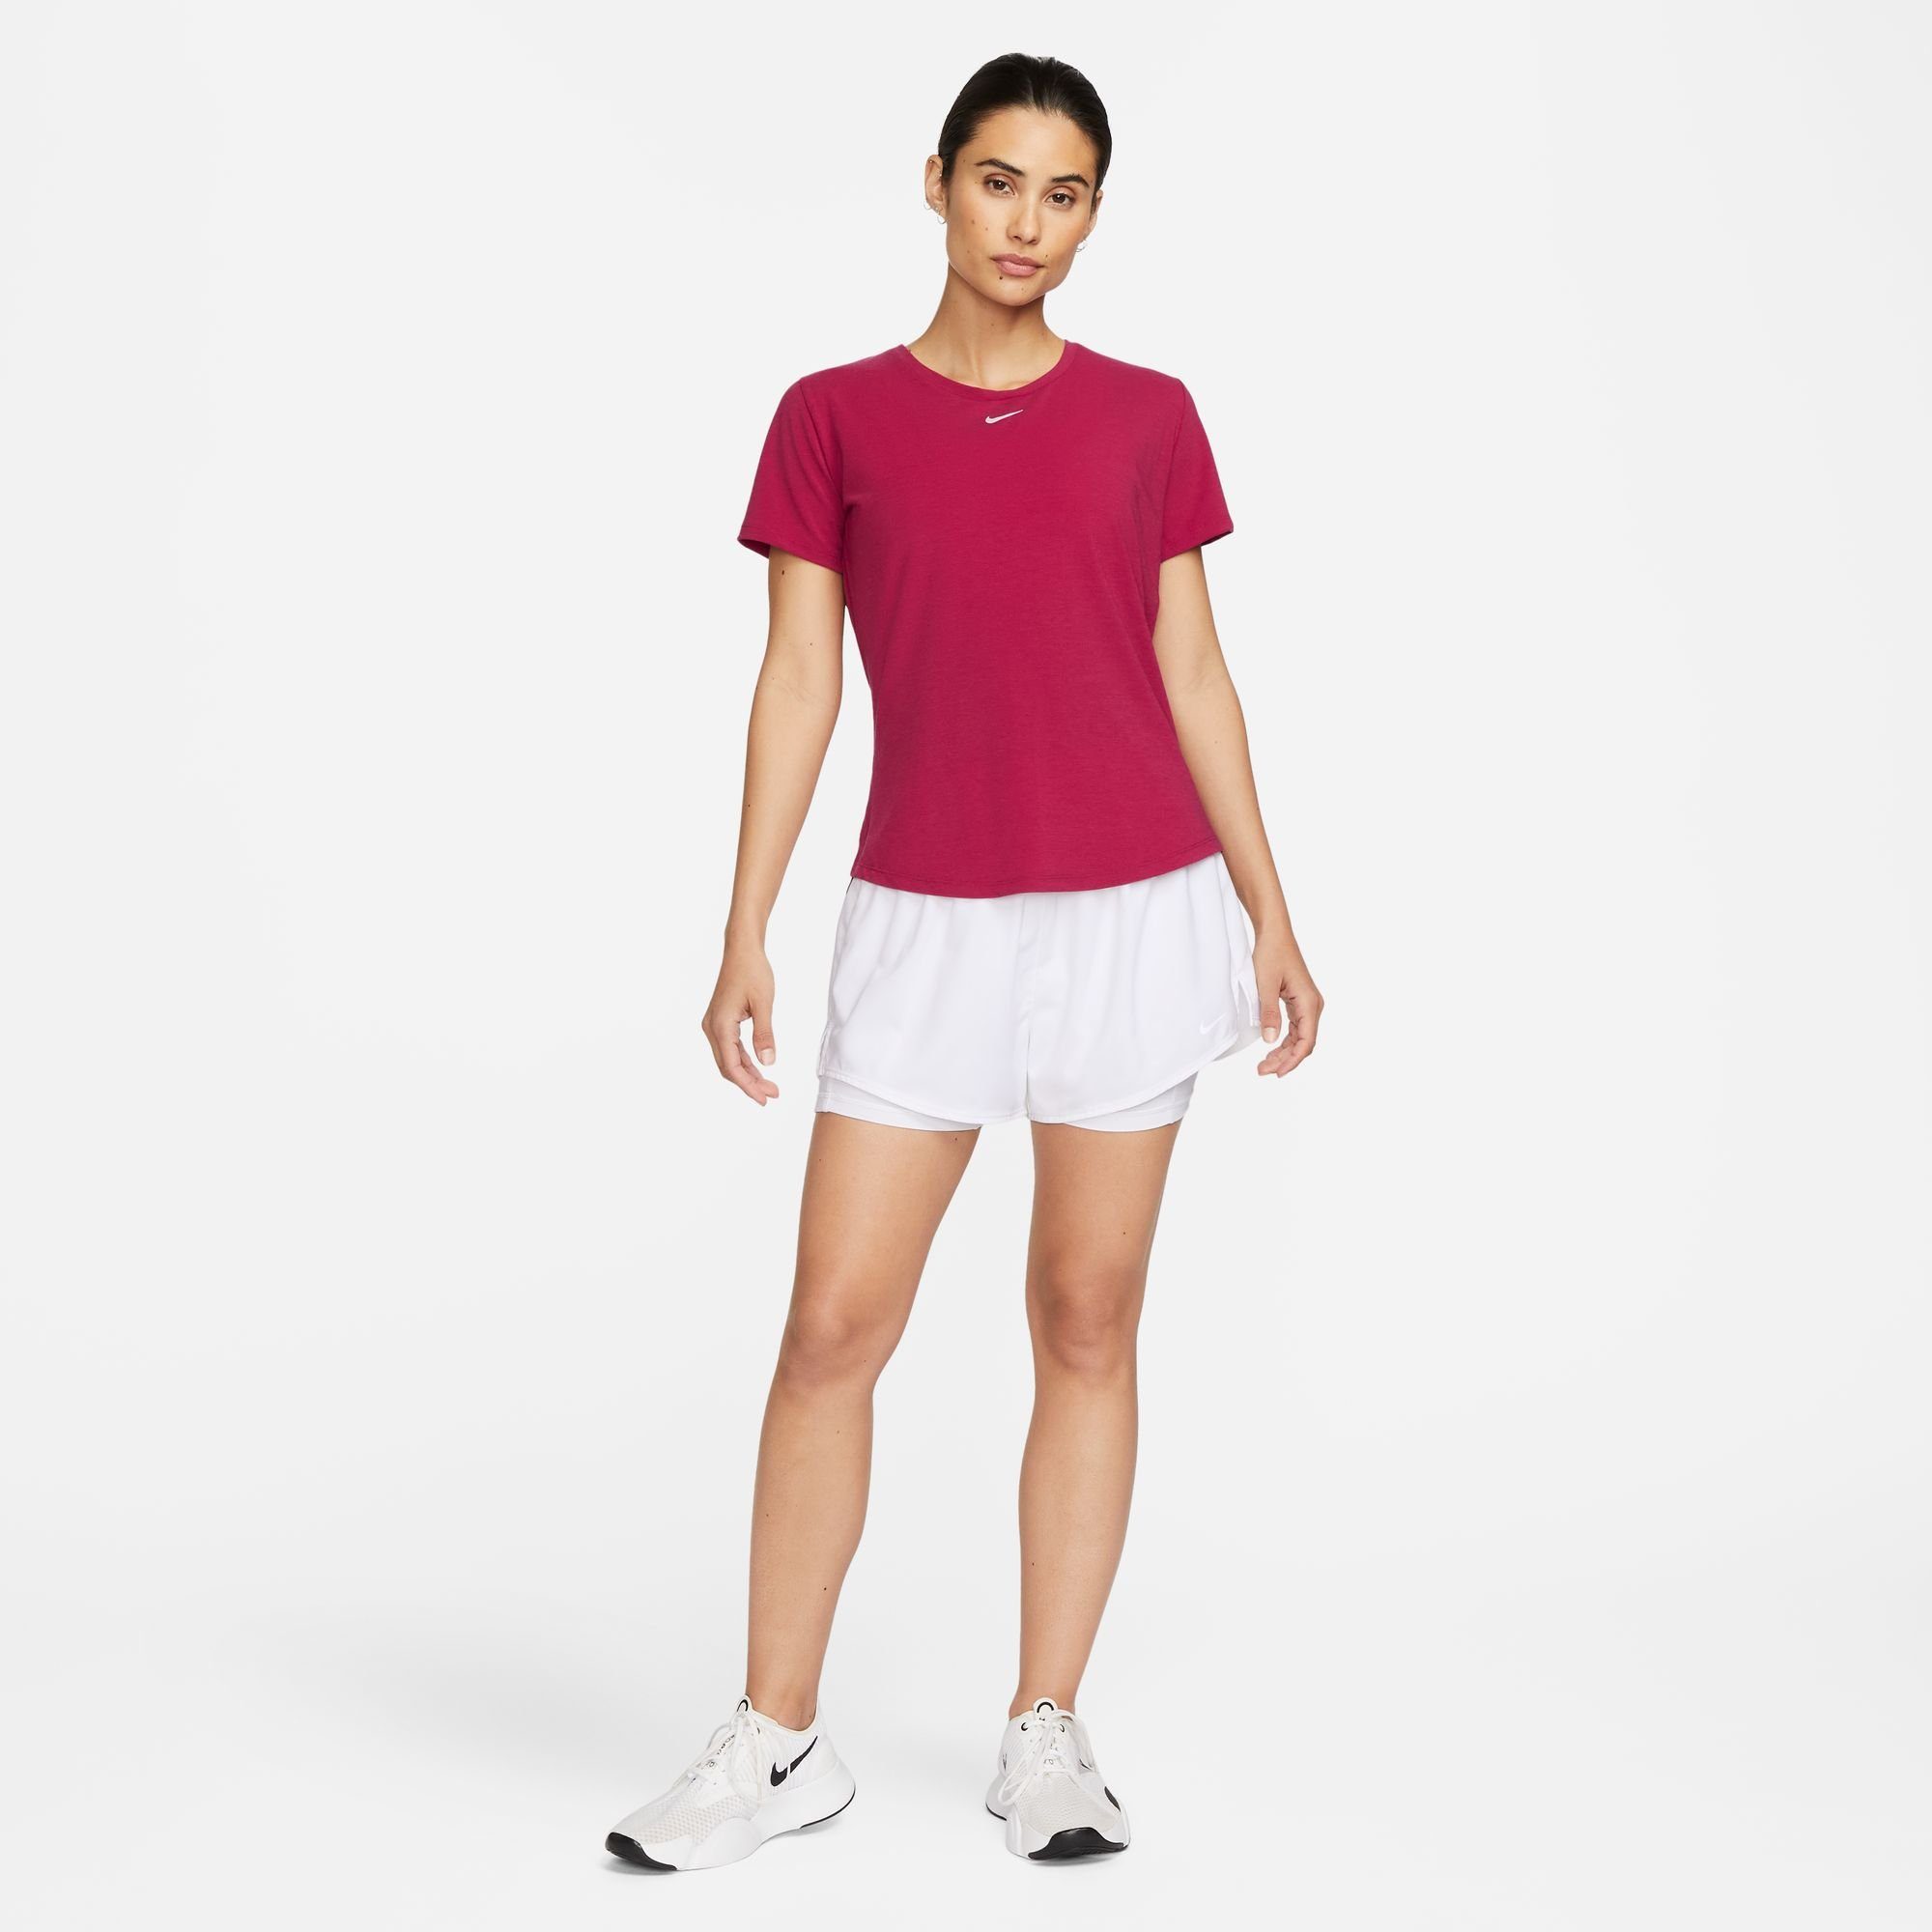 NOBLE RED/REFLECTIVE SHORT-SLEEVE ONE LUXE Trainingsshirt DRI-FIT UV STANDARD WOMEN'S SILV Nike FIT TOP